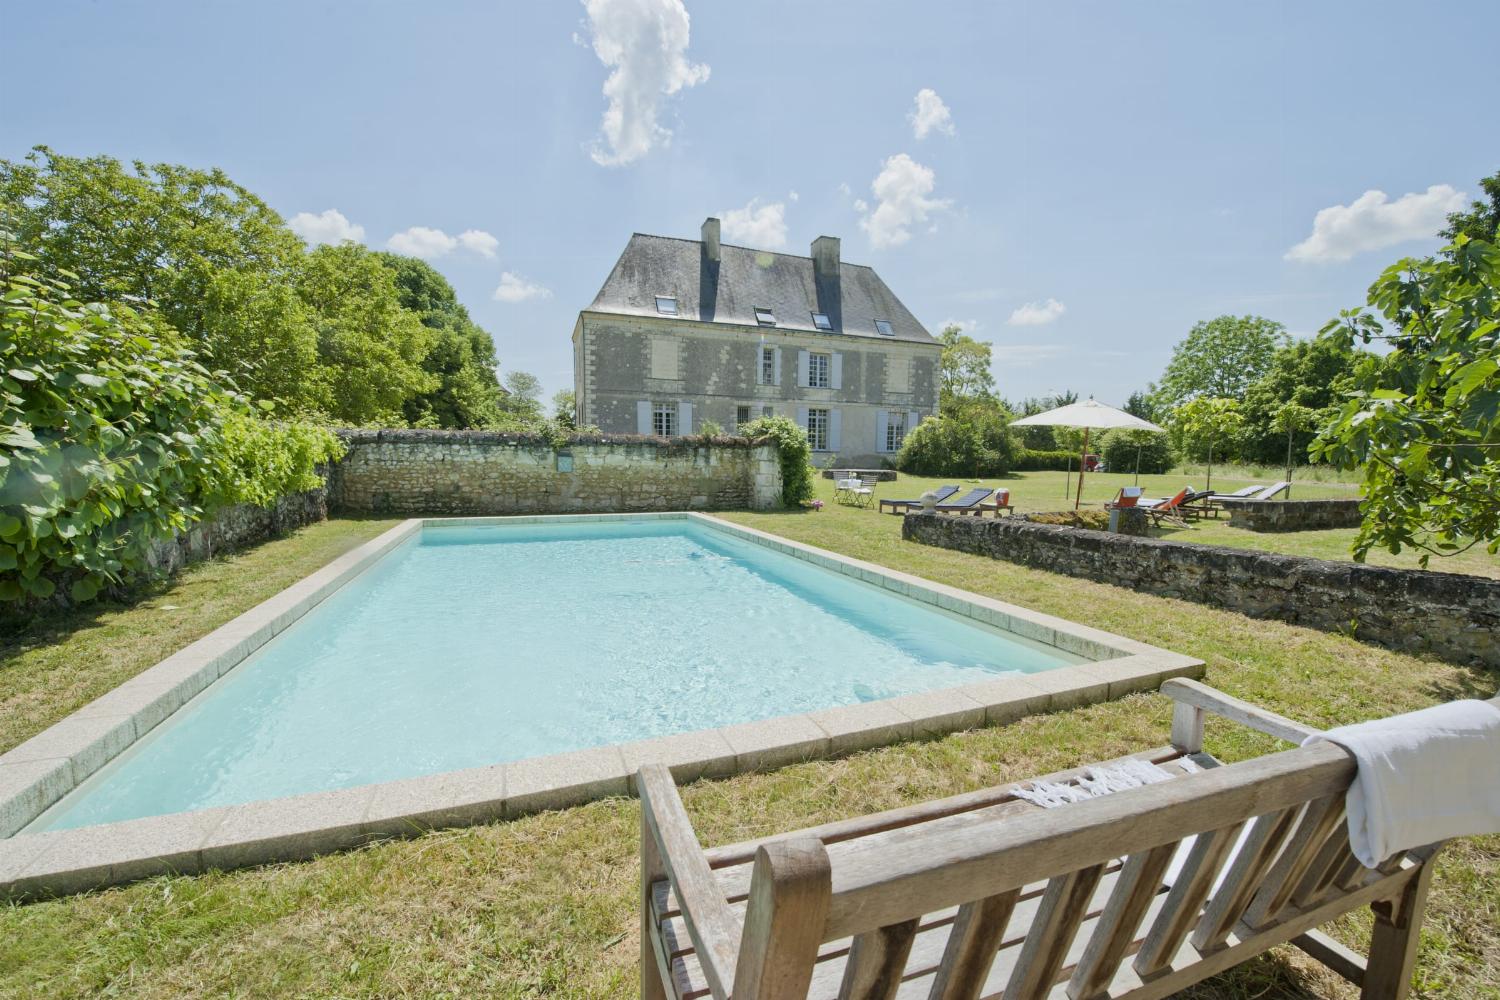 Holiday accommodation in the Loire Valley with private heated pool